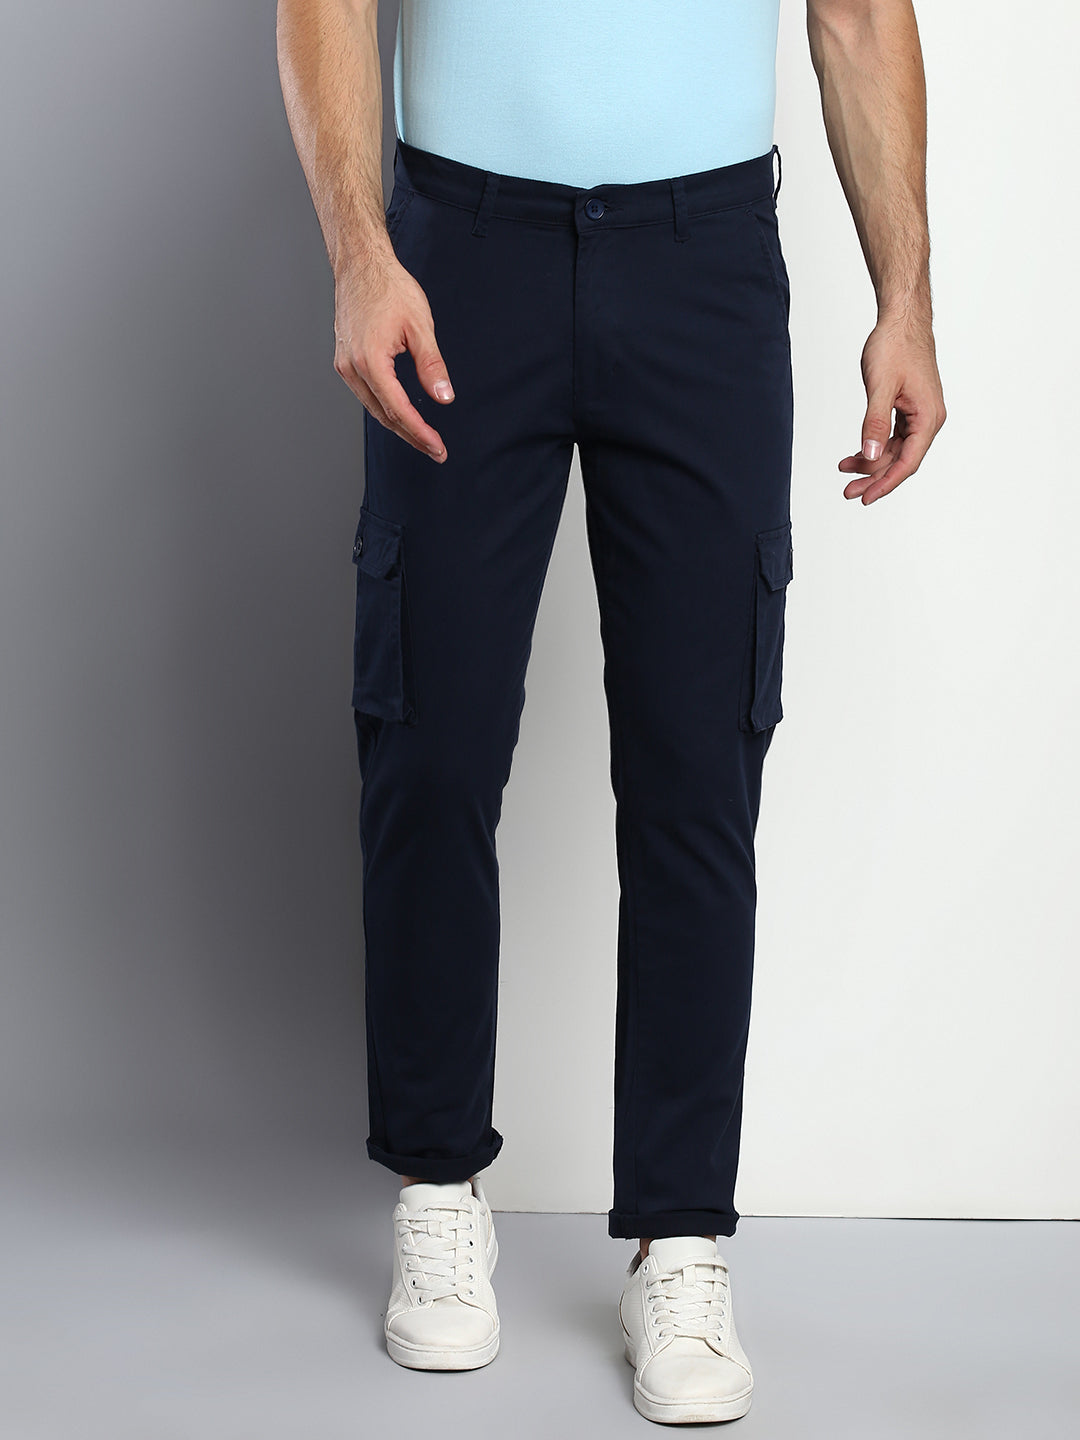 Formal pants for men made at your doorstep